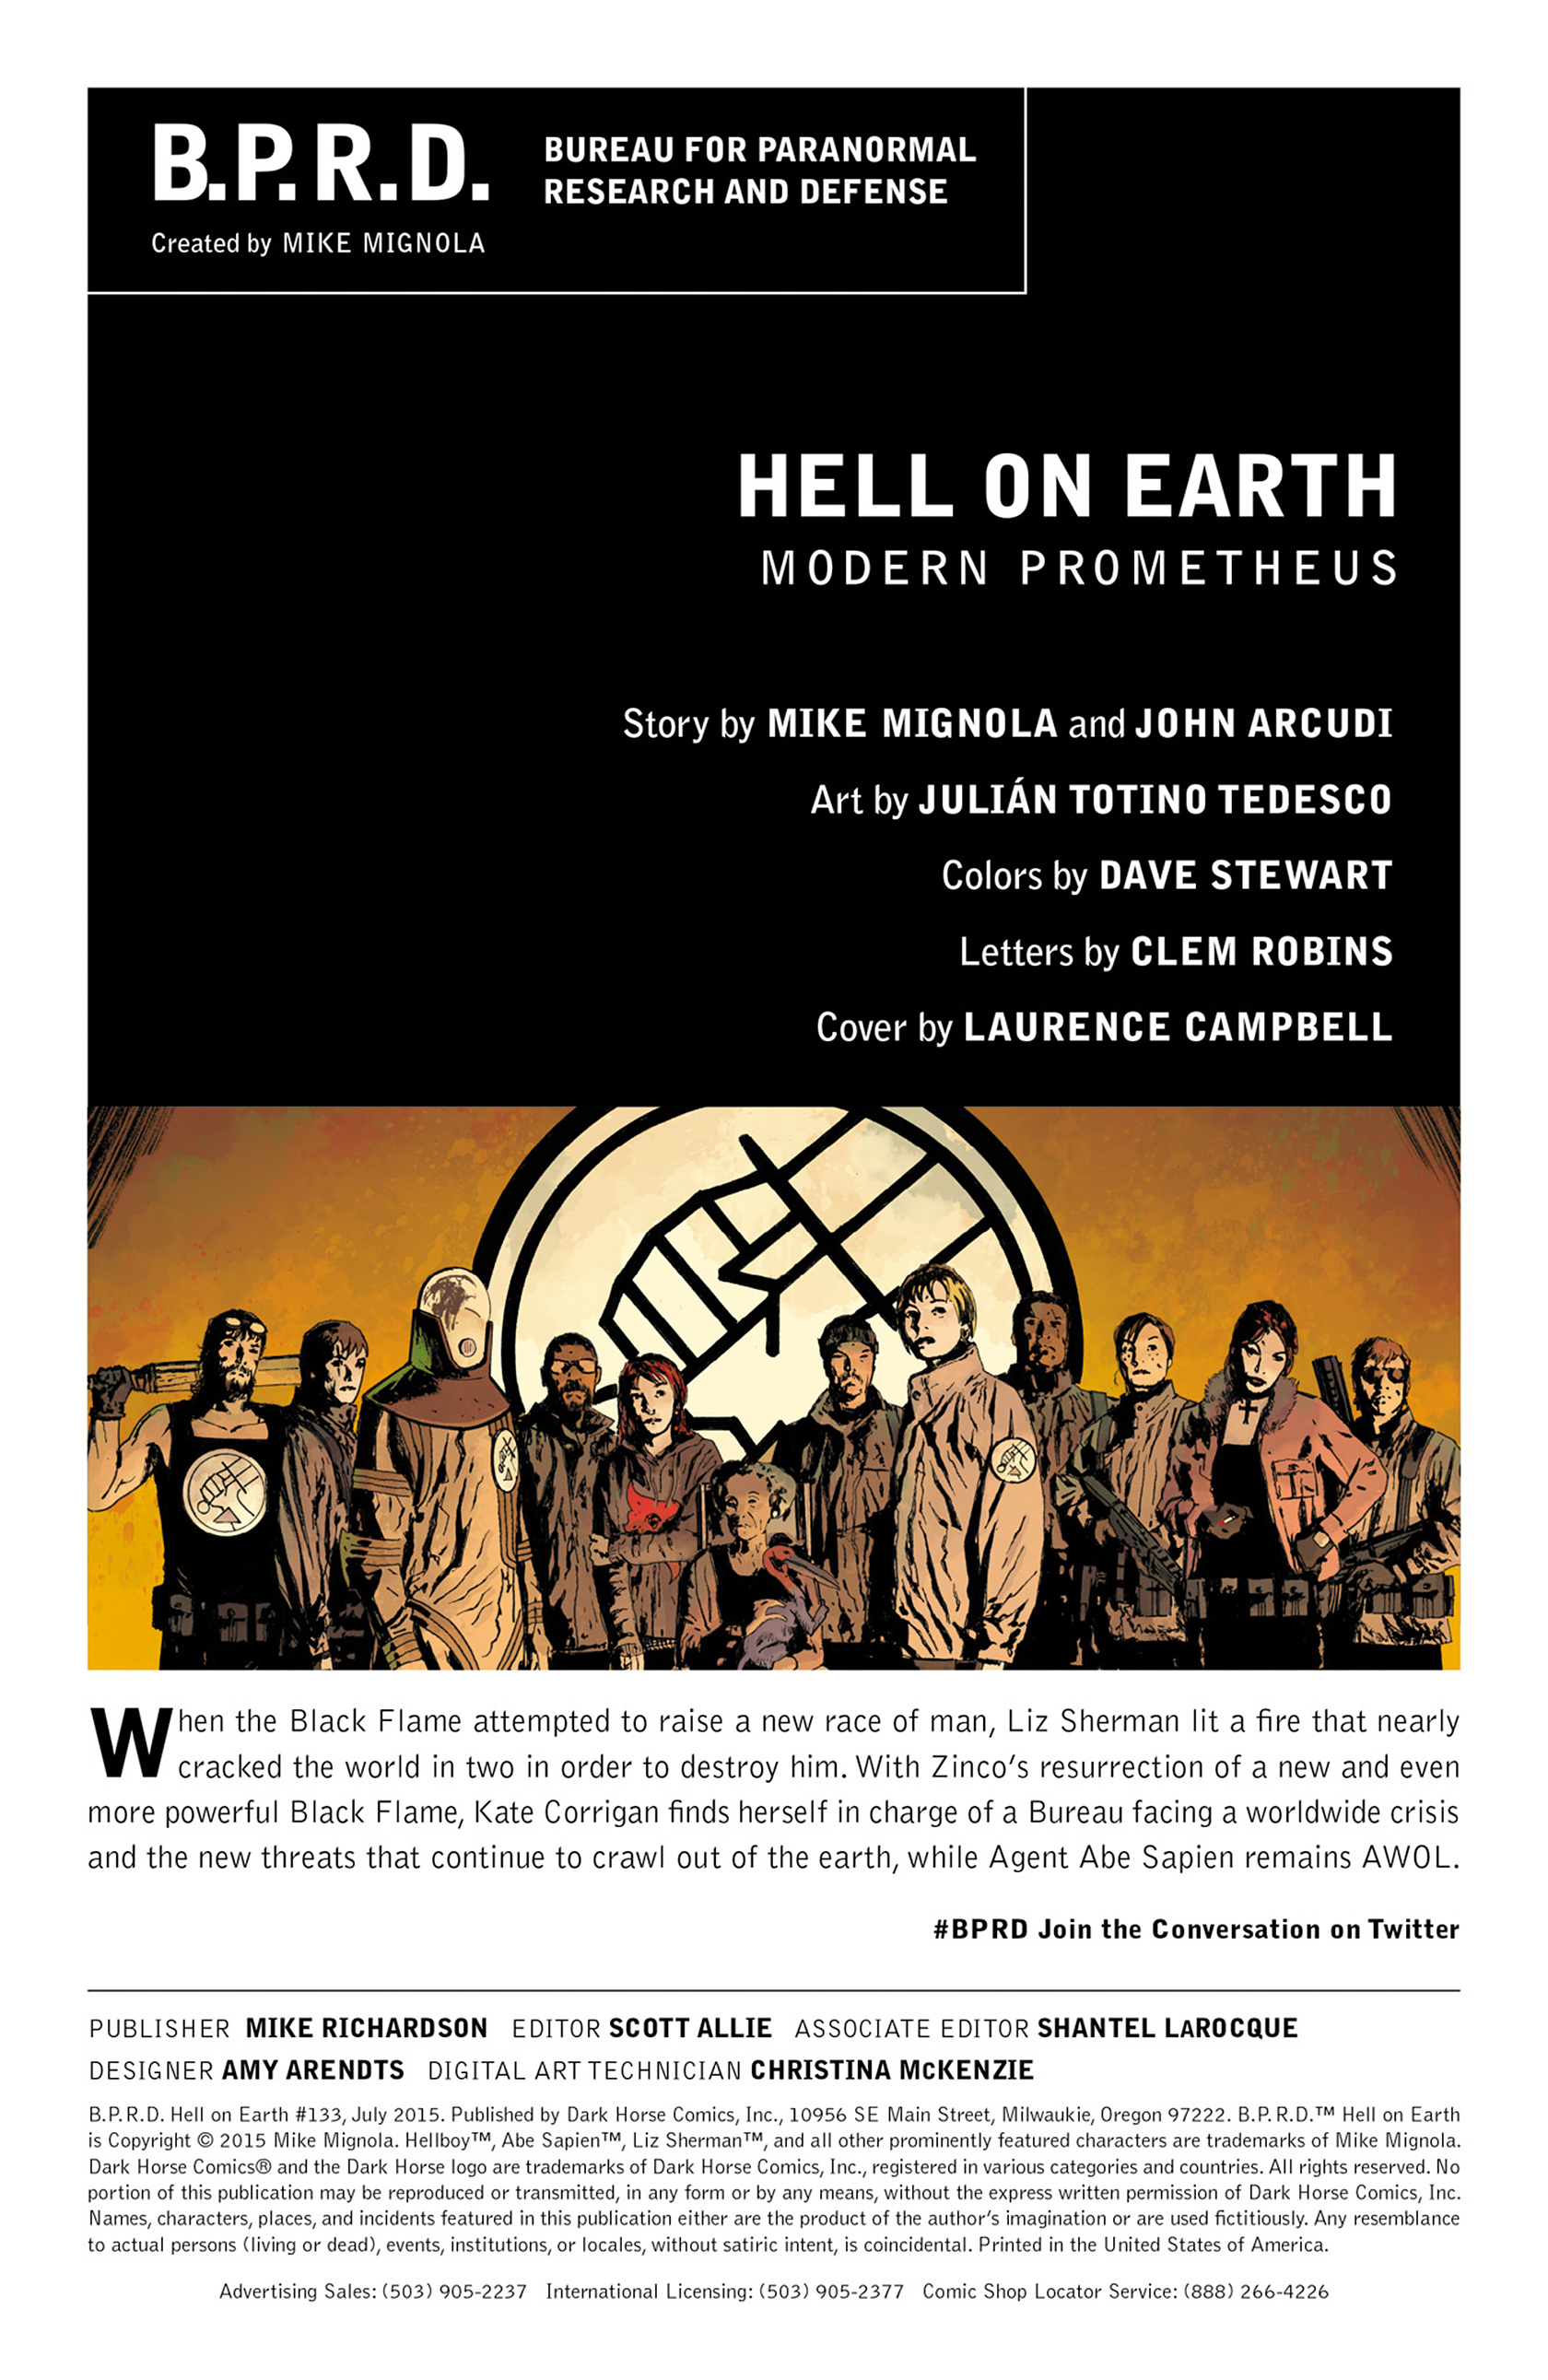 Read online B.P.R.D. Hell on Earth comic -  Issue #133 - 2